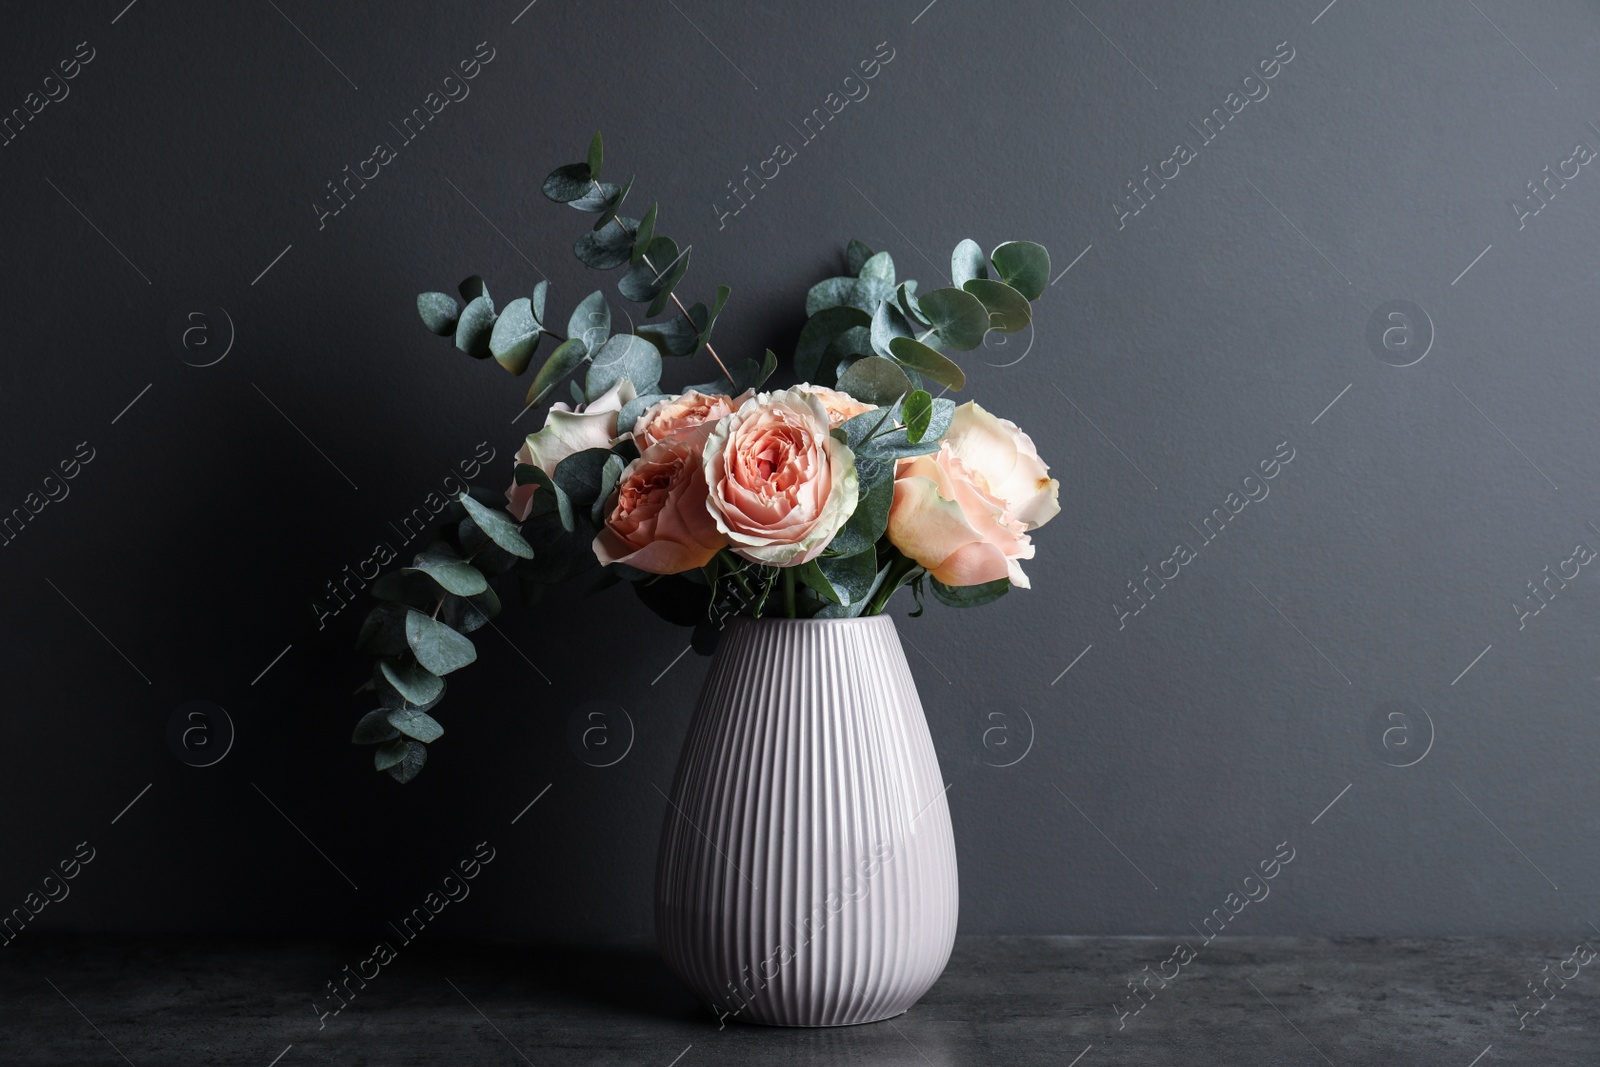 Photo of Bouquet of beautiful flowers and eucalyptus branches in vase on table against black background